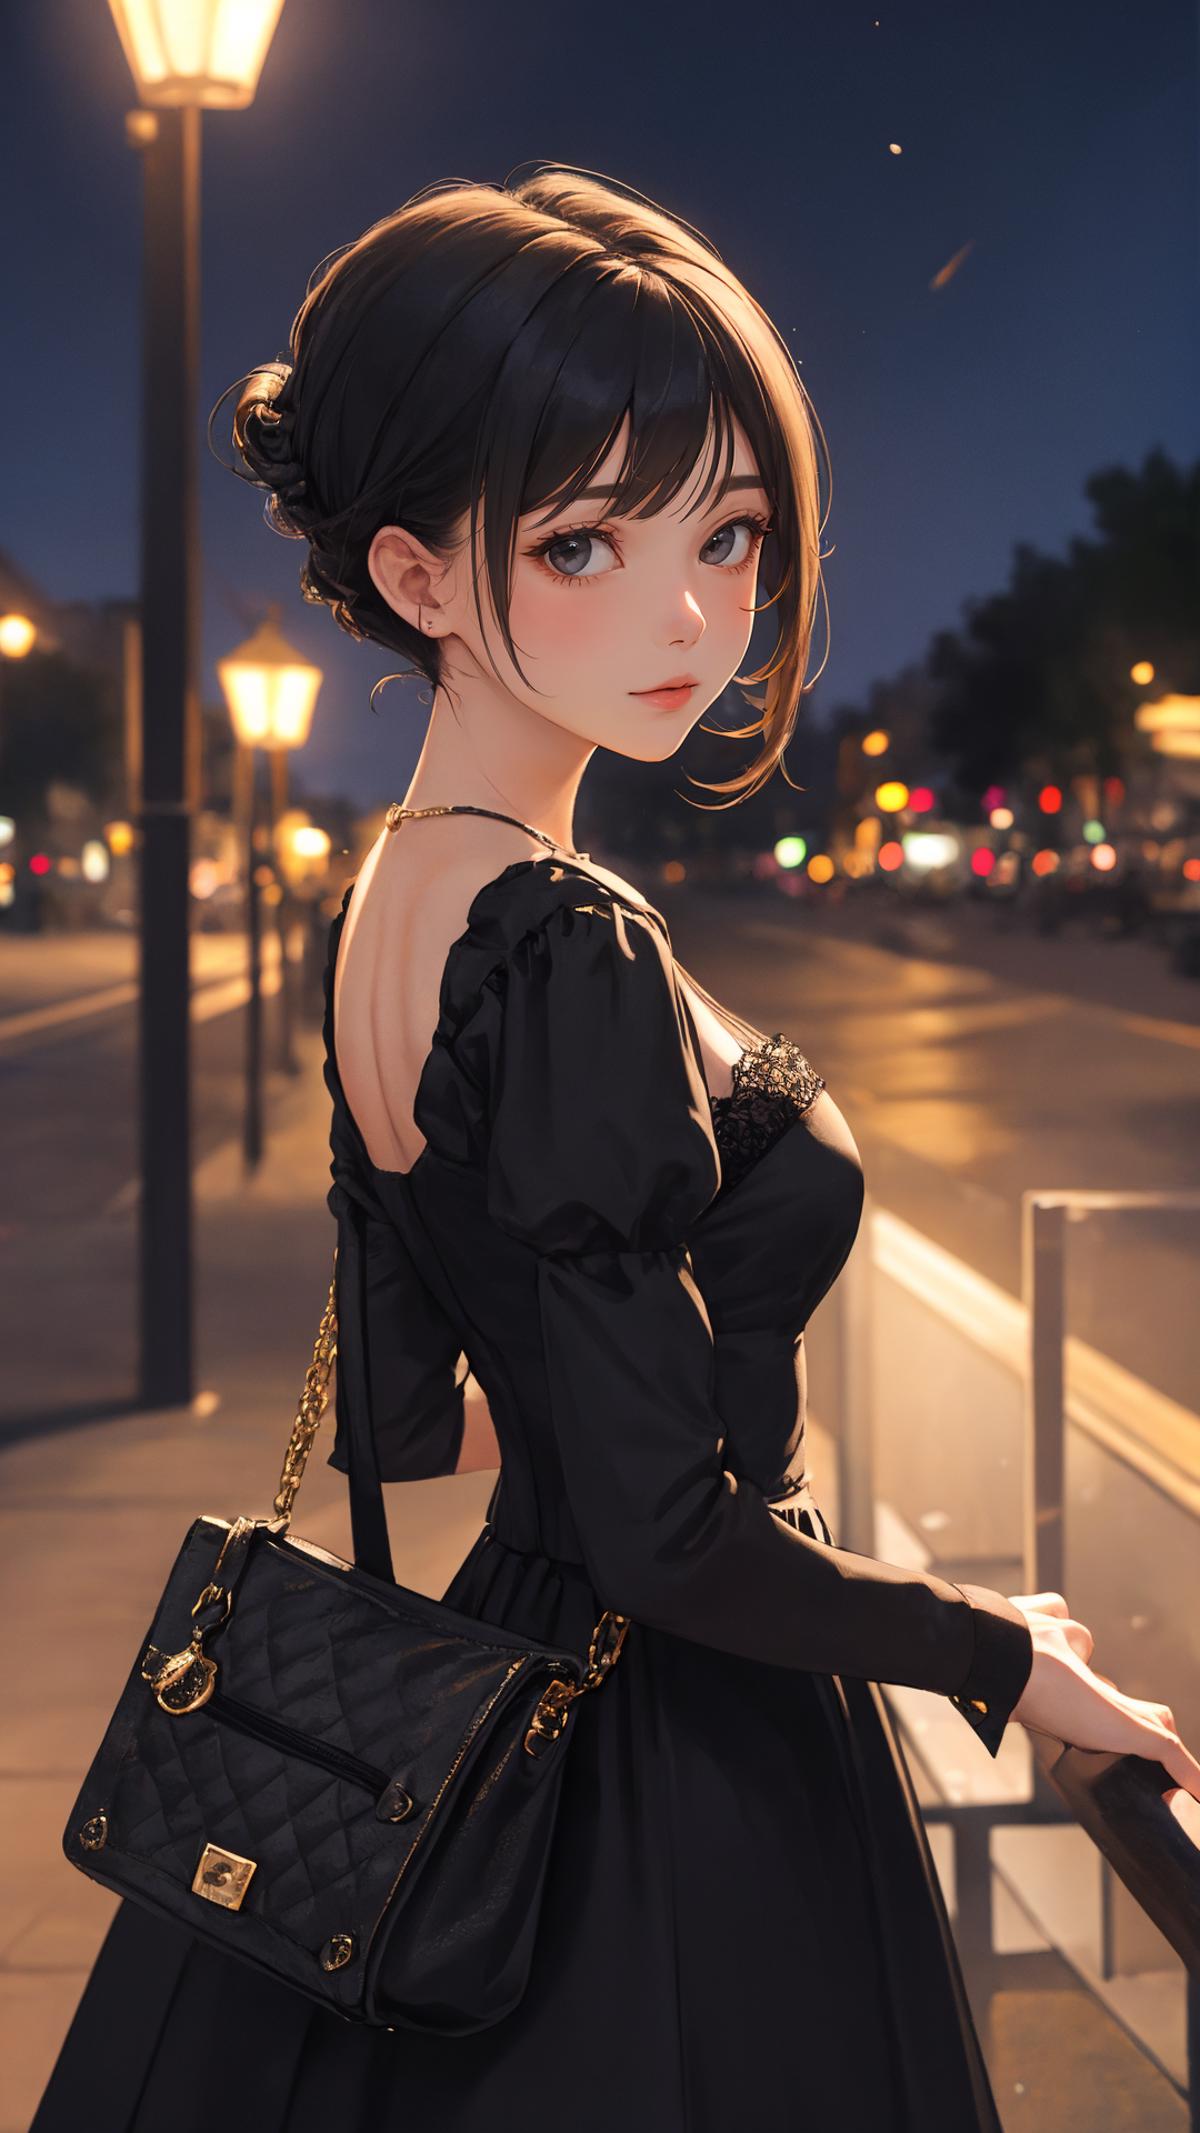 Anime-style drawing of a woman in a black dress.